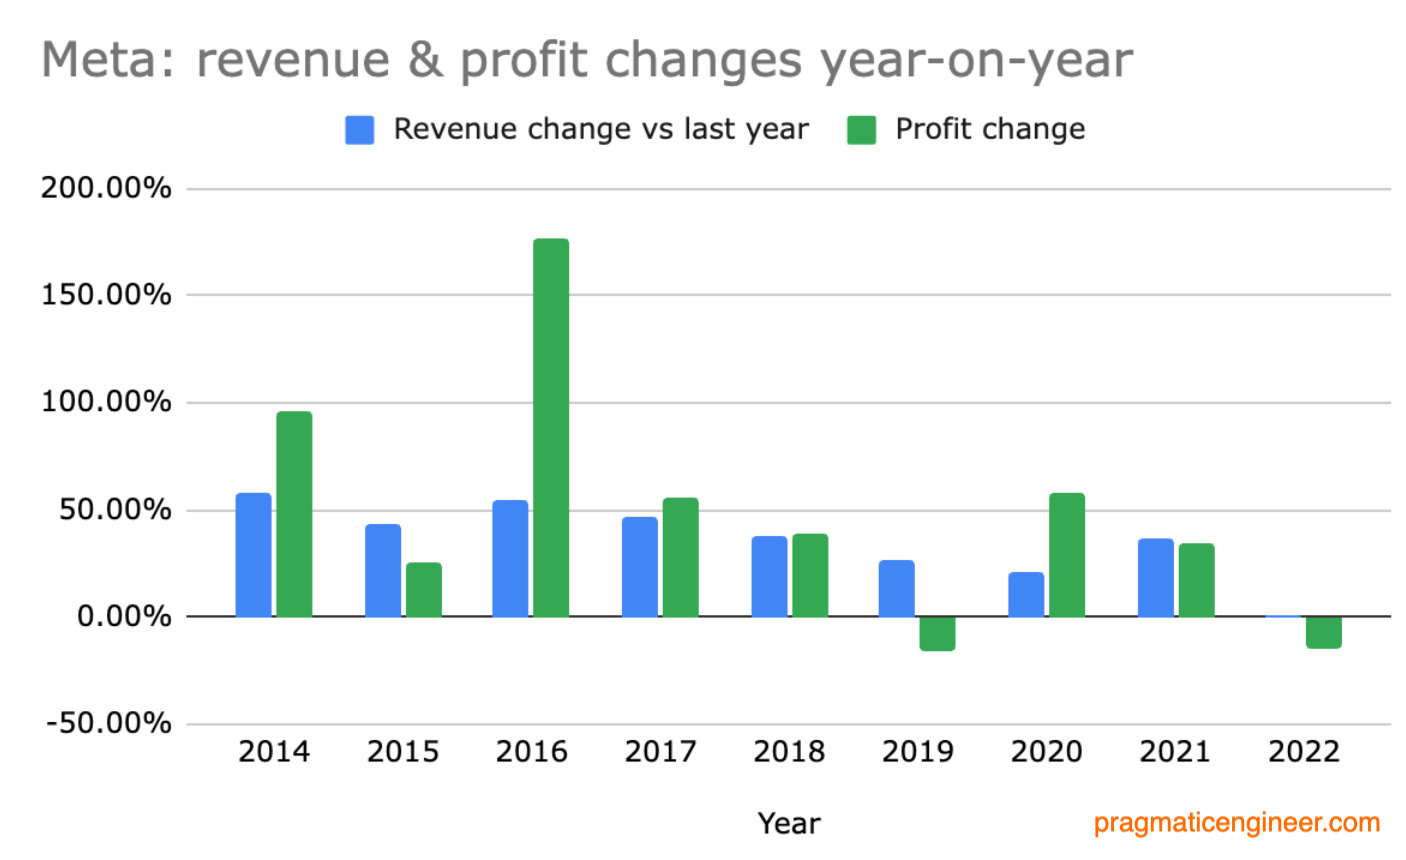 Revenue and profit changes at Facebook / Meta versus the previous year, 2014-2022.